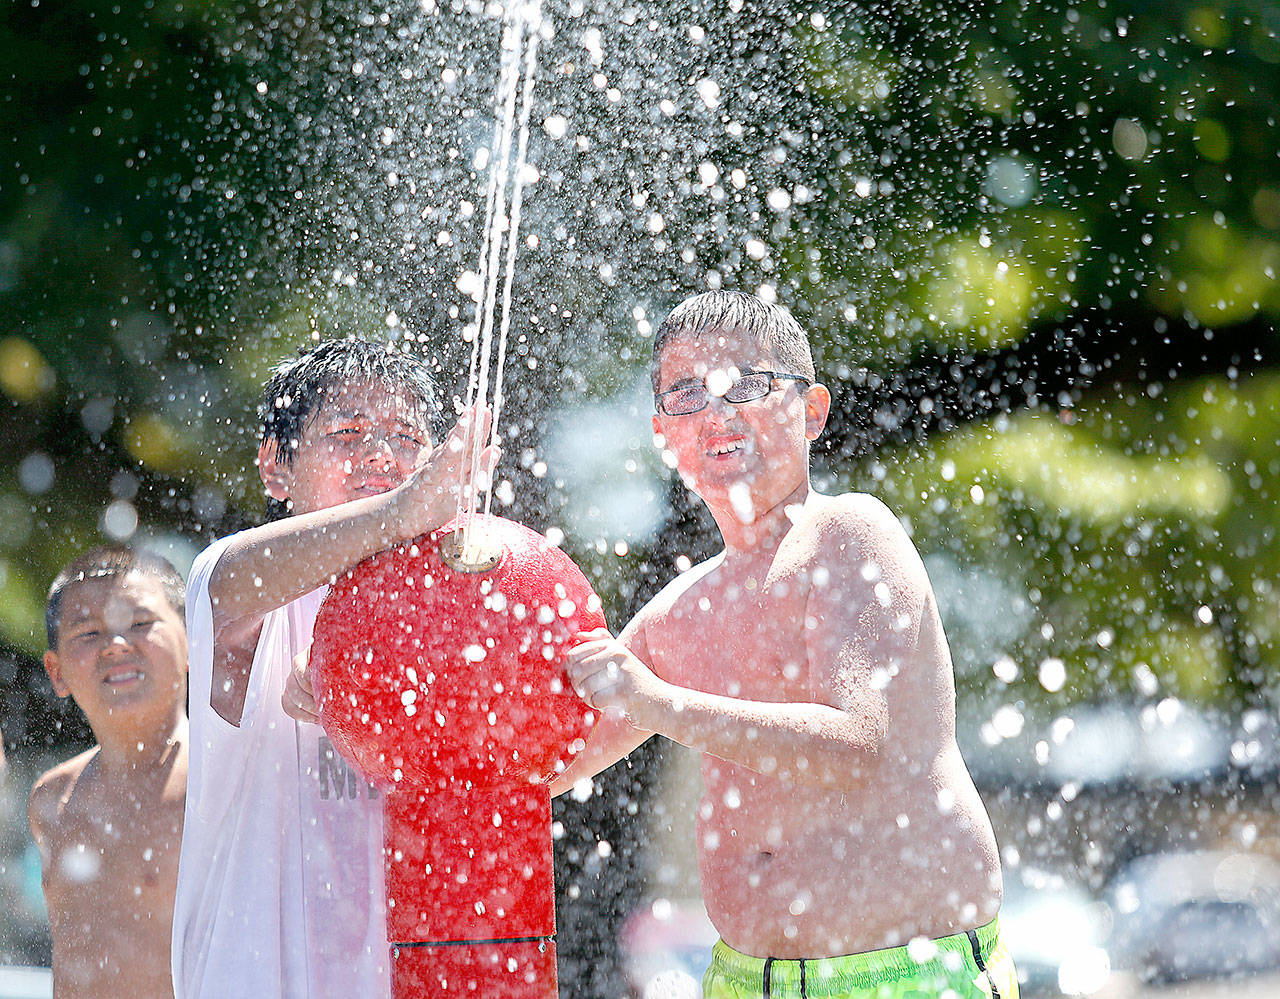 Isaias Komok, (center) and Zakary Wagner (right) aim a water cannon at Marysville’s Spray Park in Comeford Park in 2014. (Herald file photo)